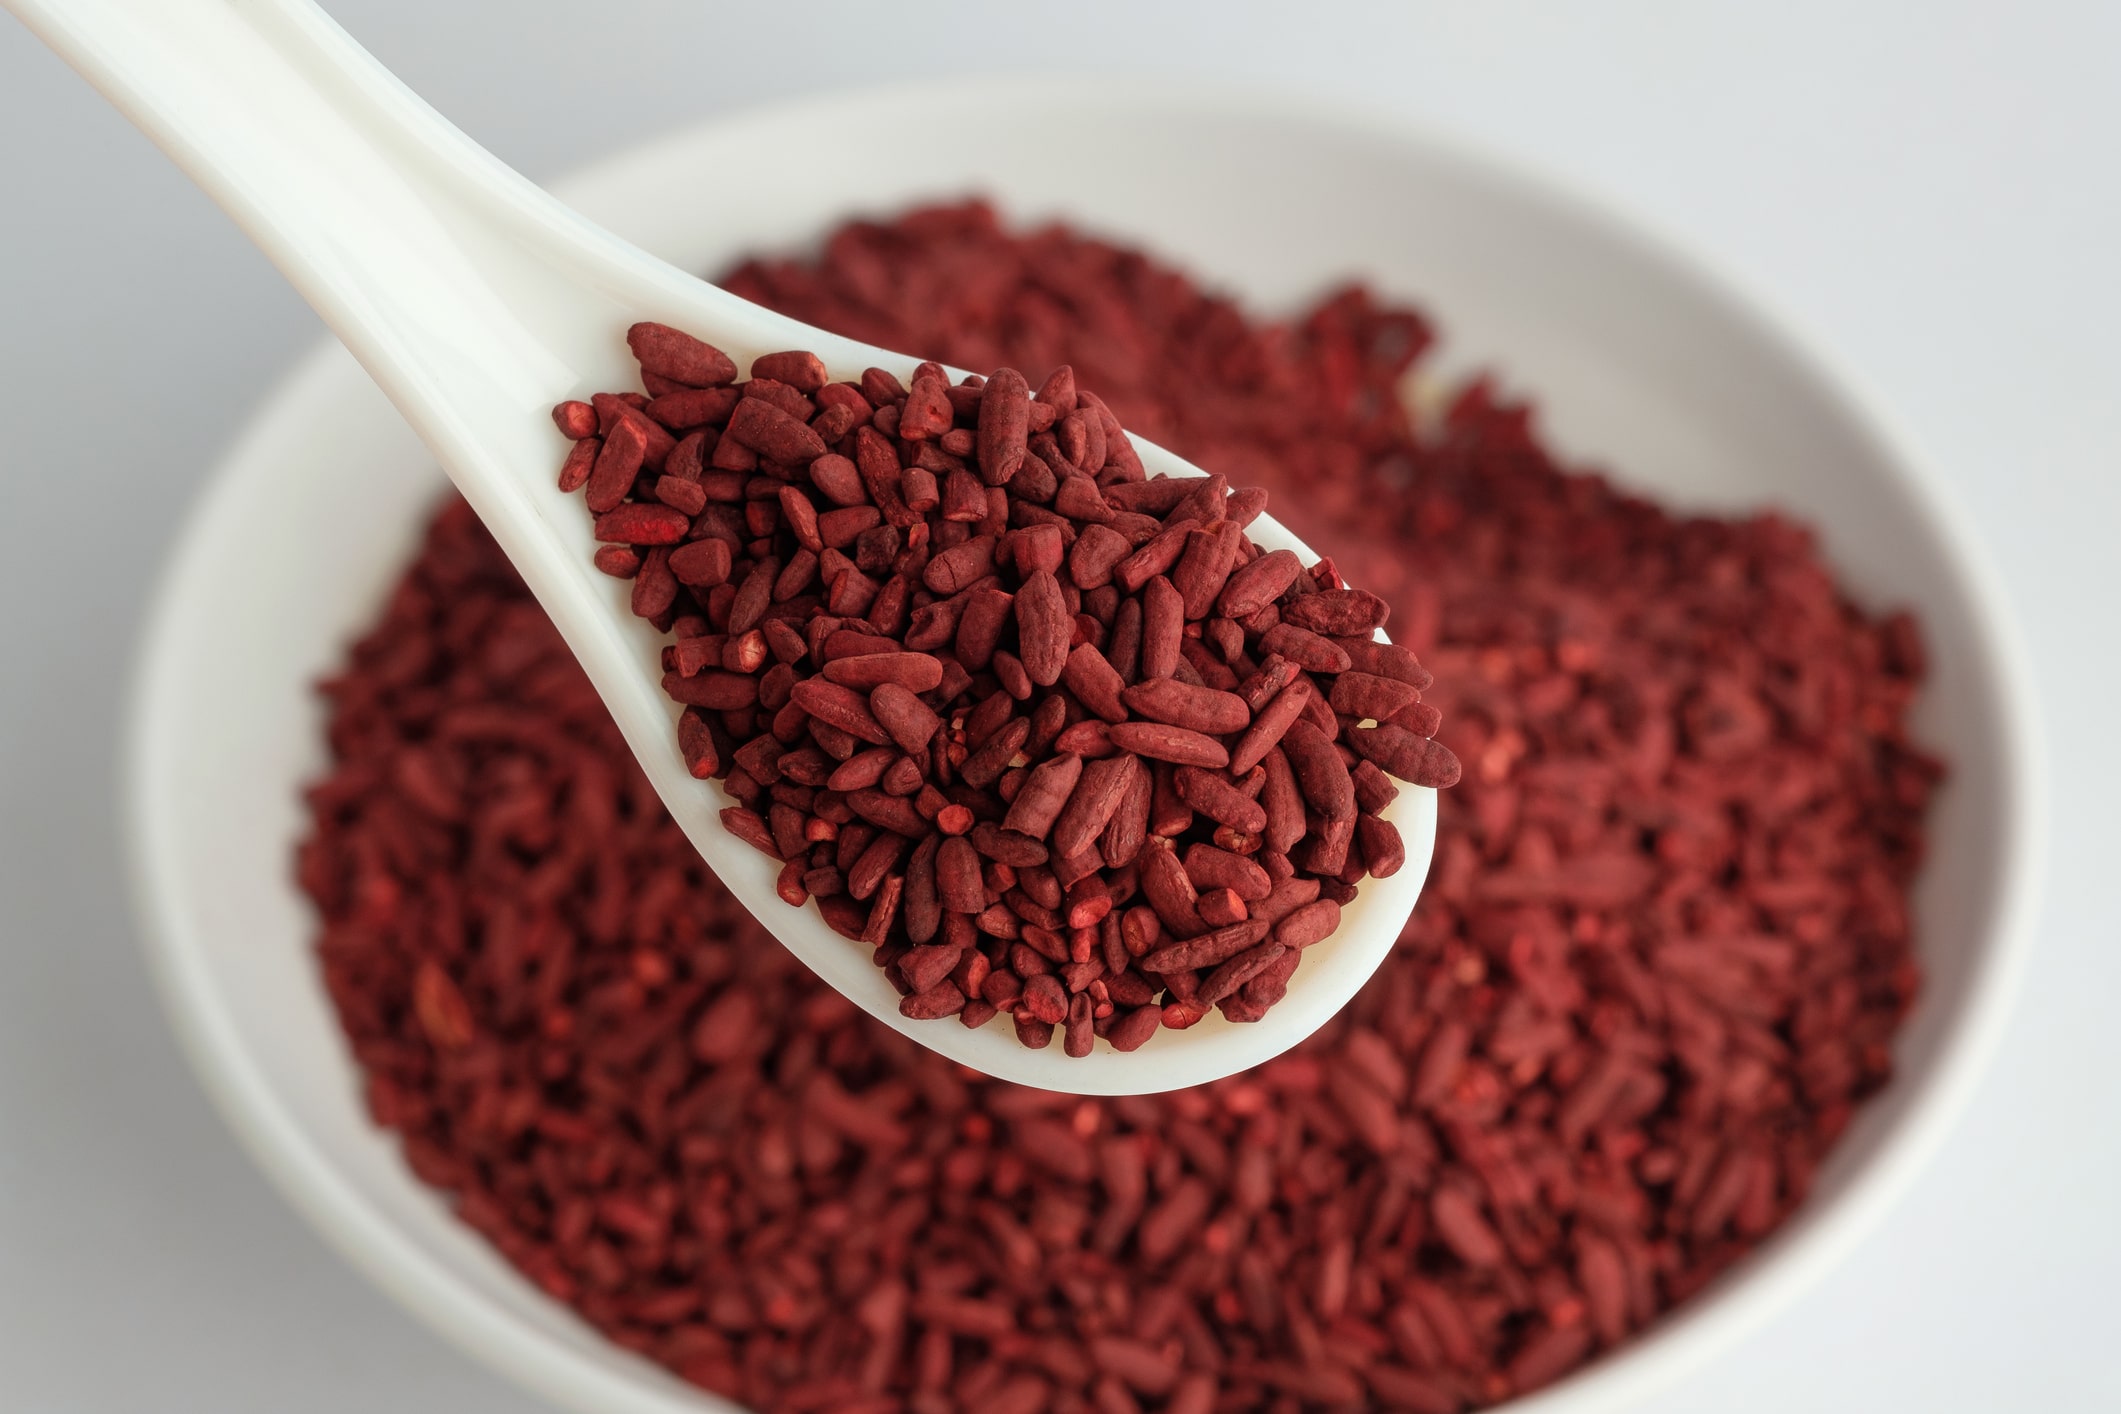 Red yeast rice may harm the liver